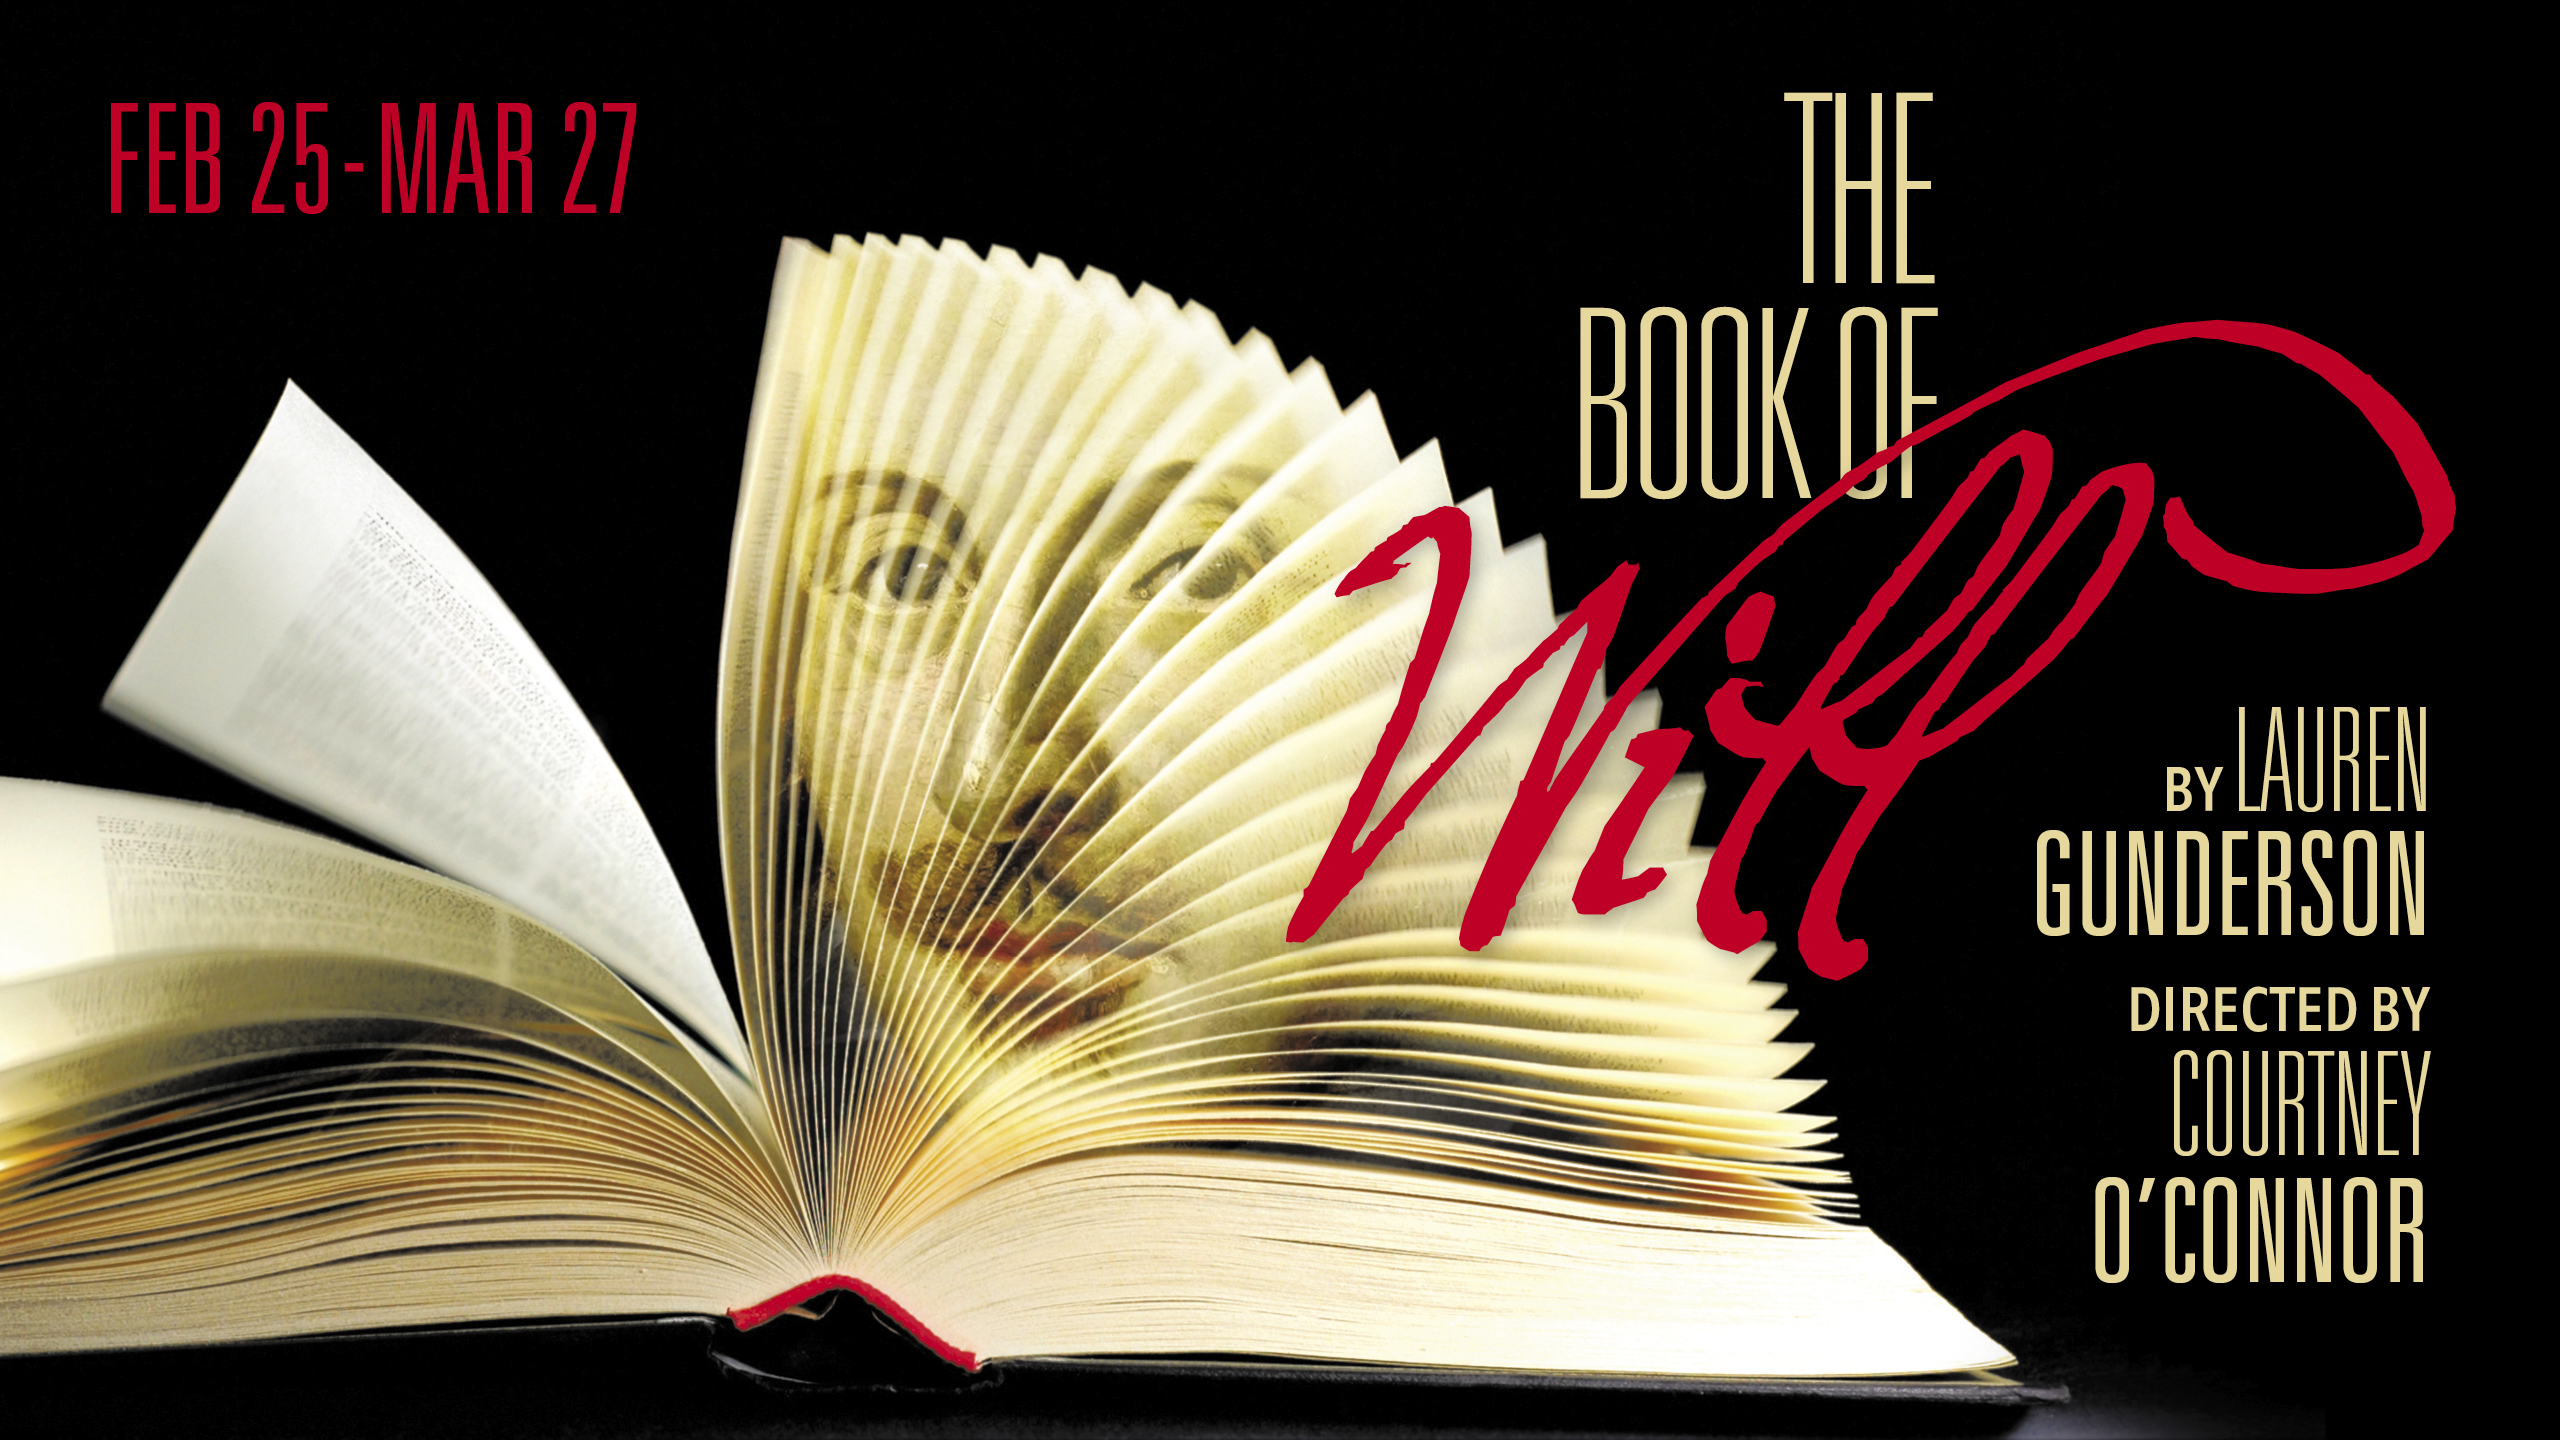 The Book of Will February 25 through March 27